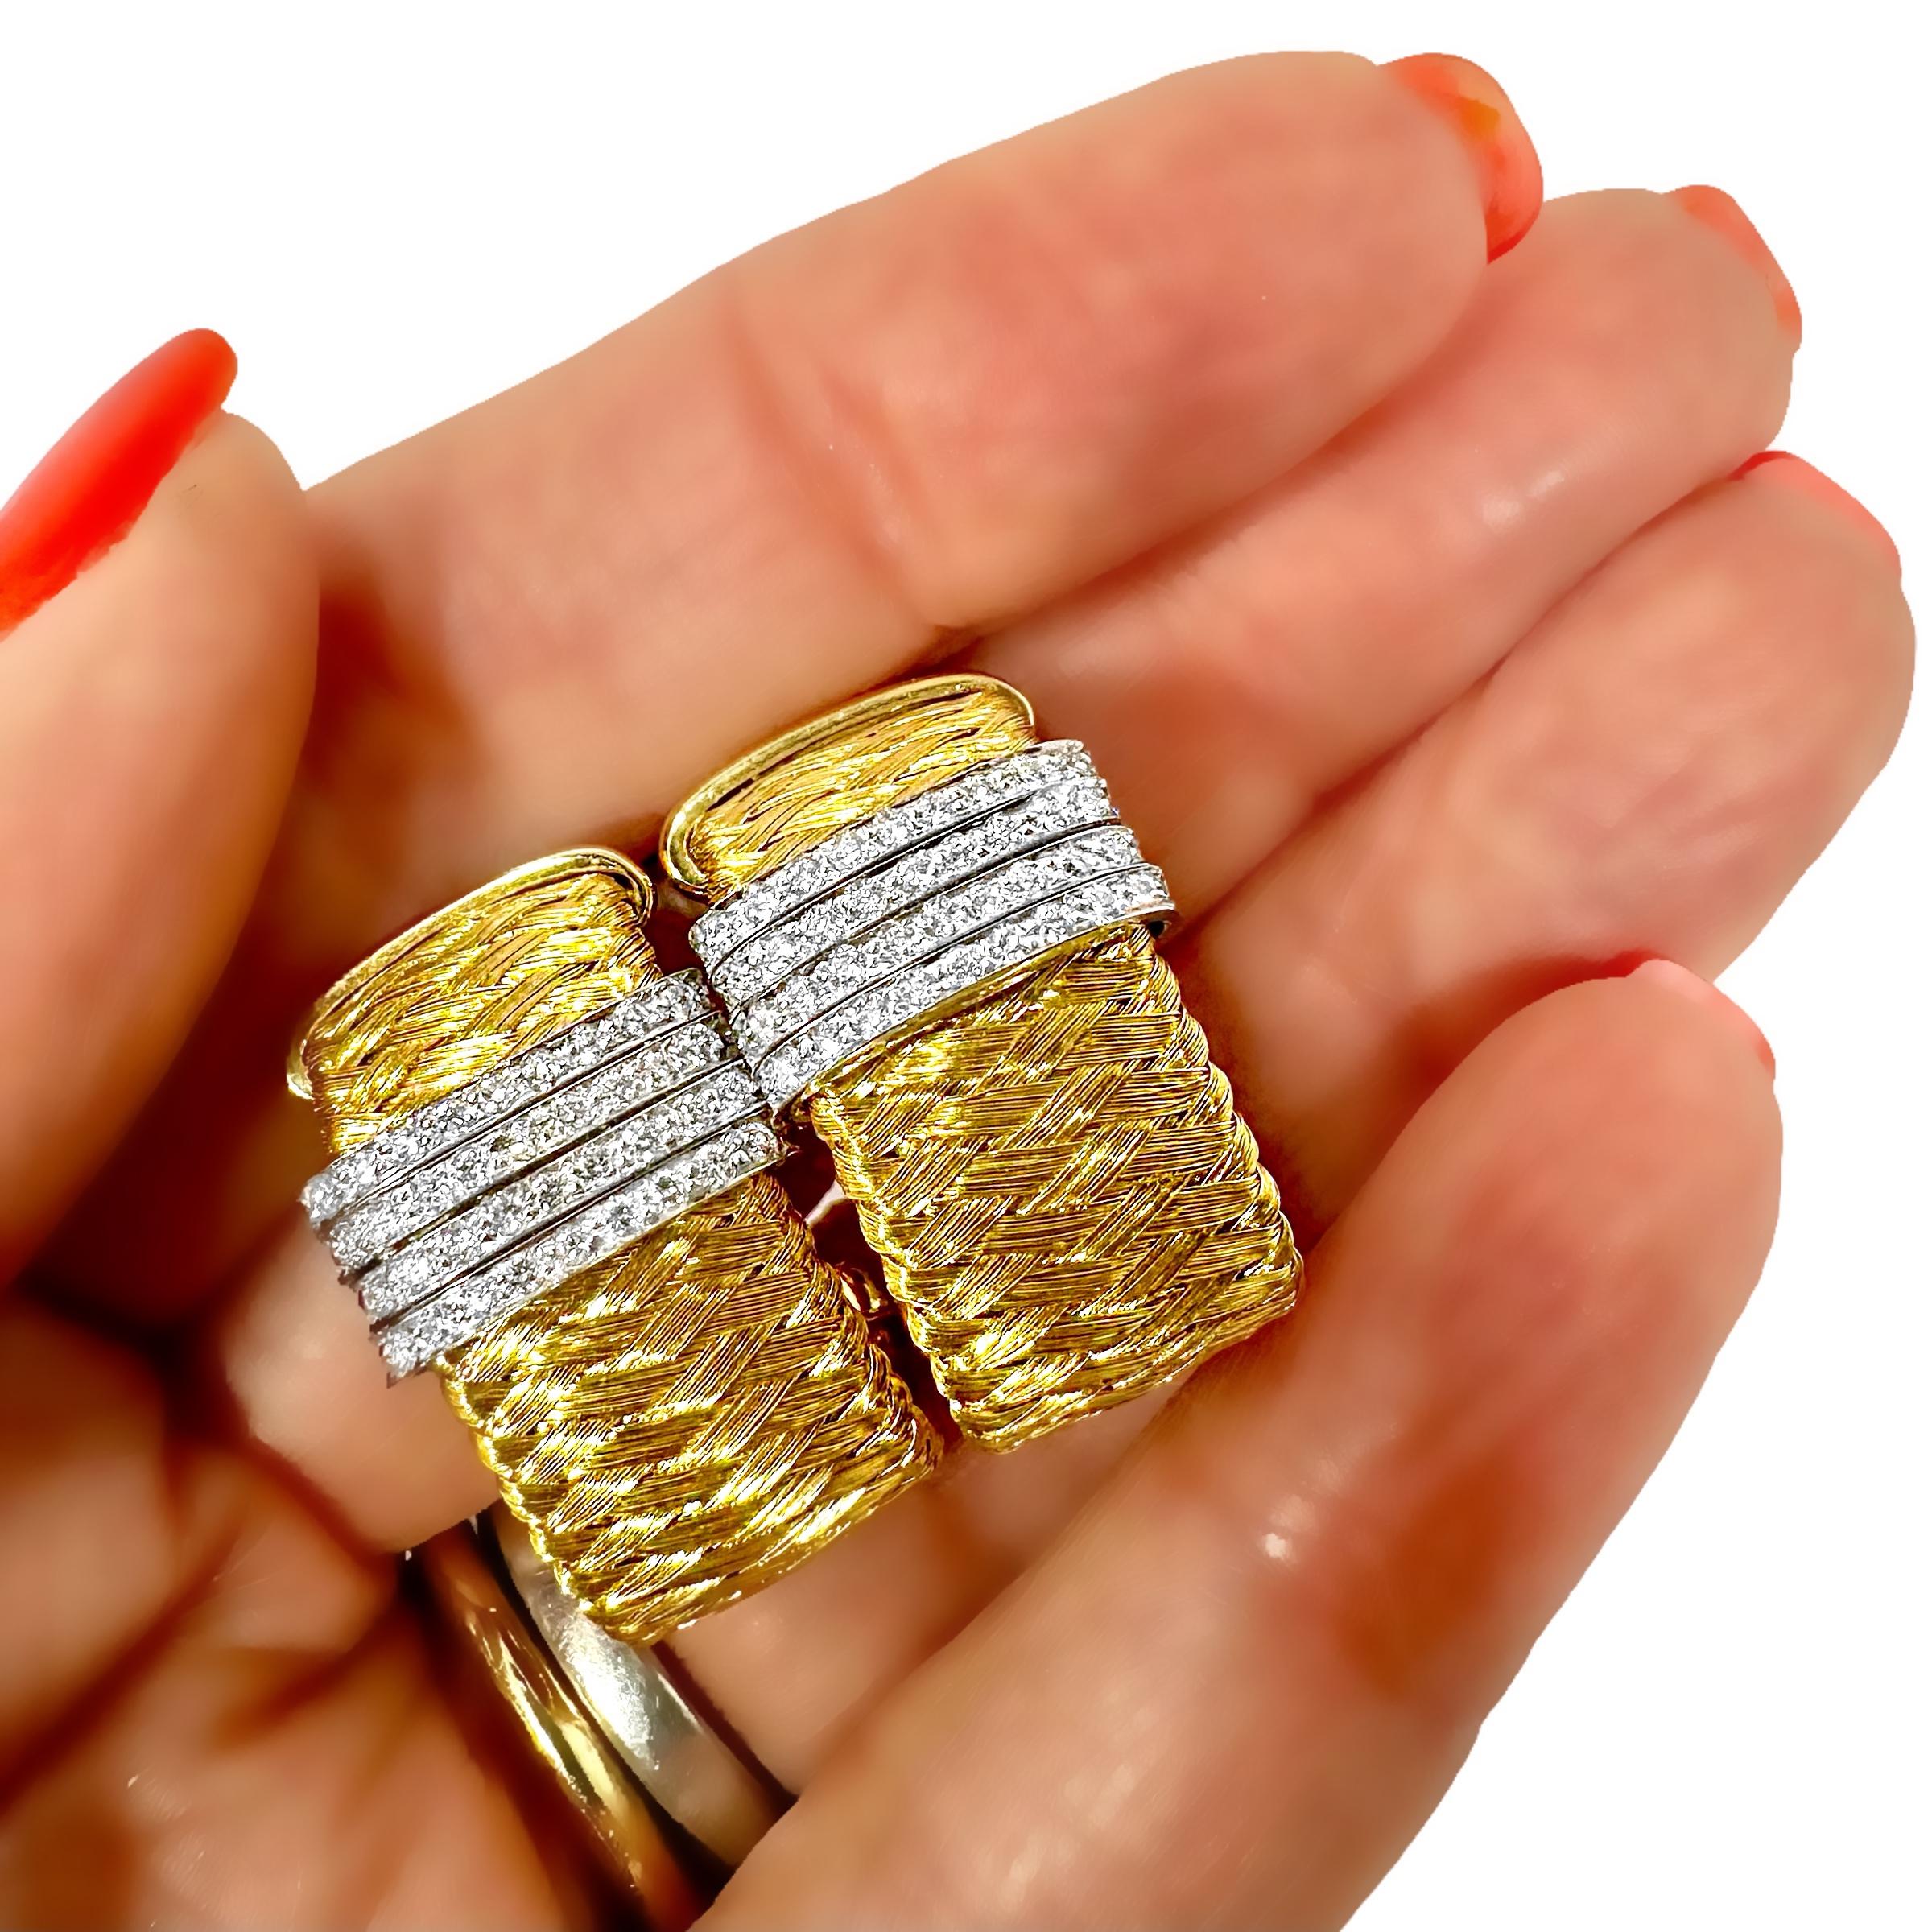 12 Strand Braided & Spun Roberto Coin Gold Hoop Earrings with Diamond Strips  For Sale 1